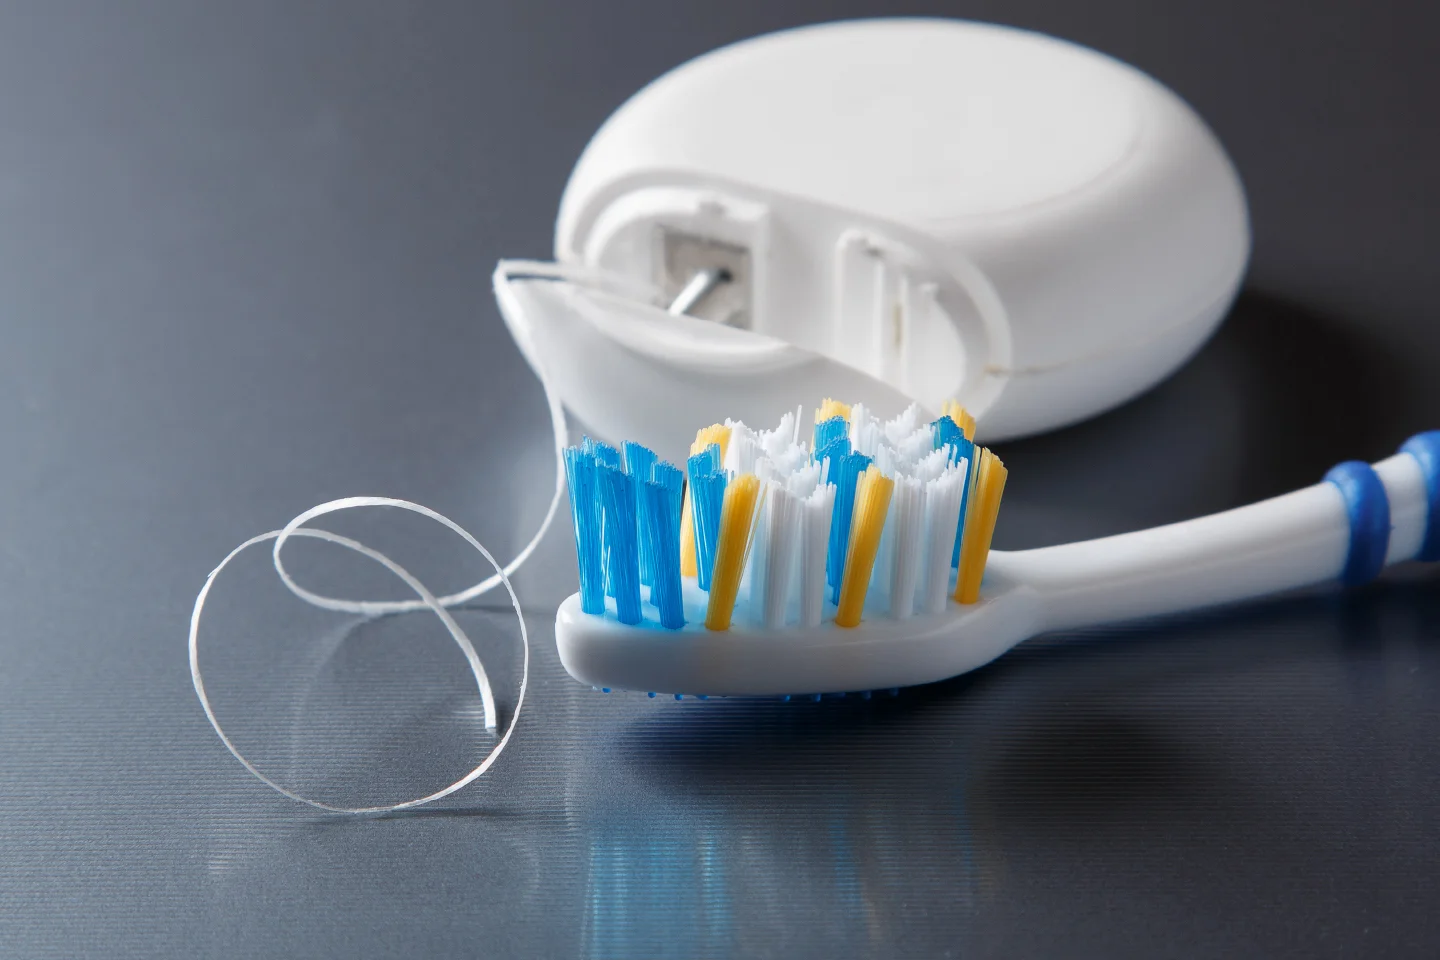 Ask a General Dentist: What Might Happen If You Do Not Floss Regularly?